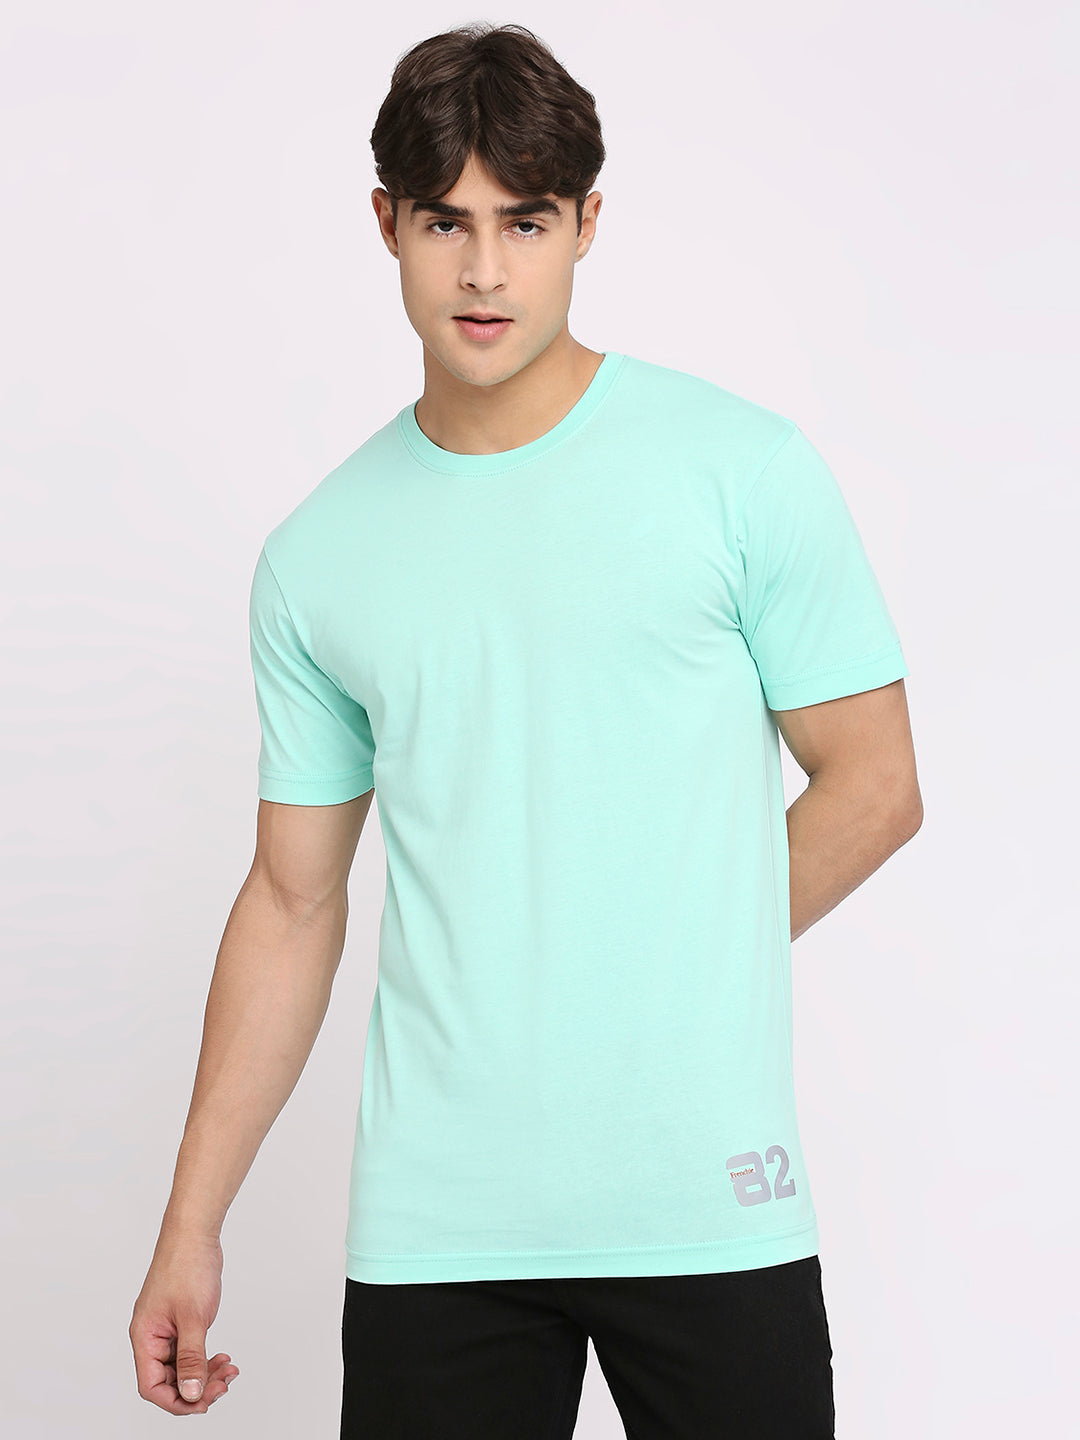 Frenchie Mens Mint Color Round Neck T-Shirt